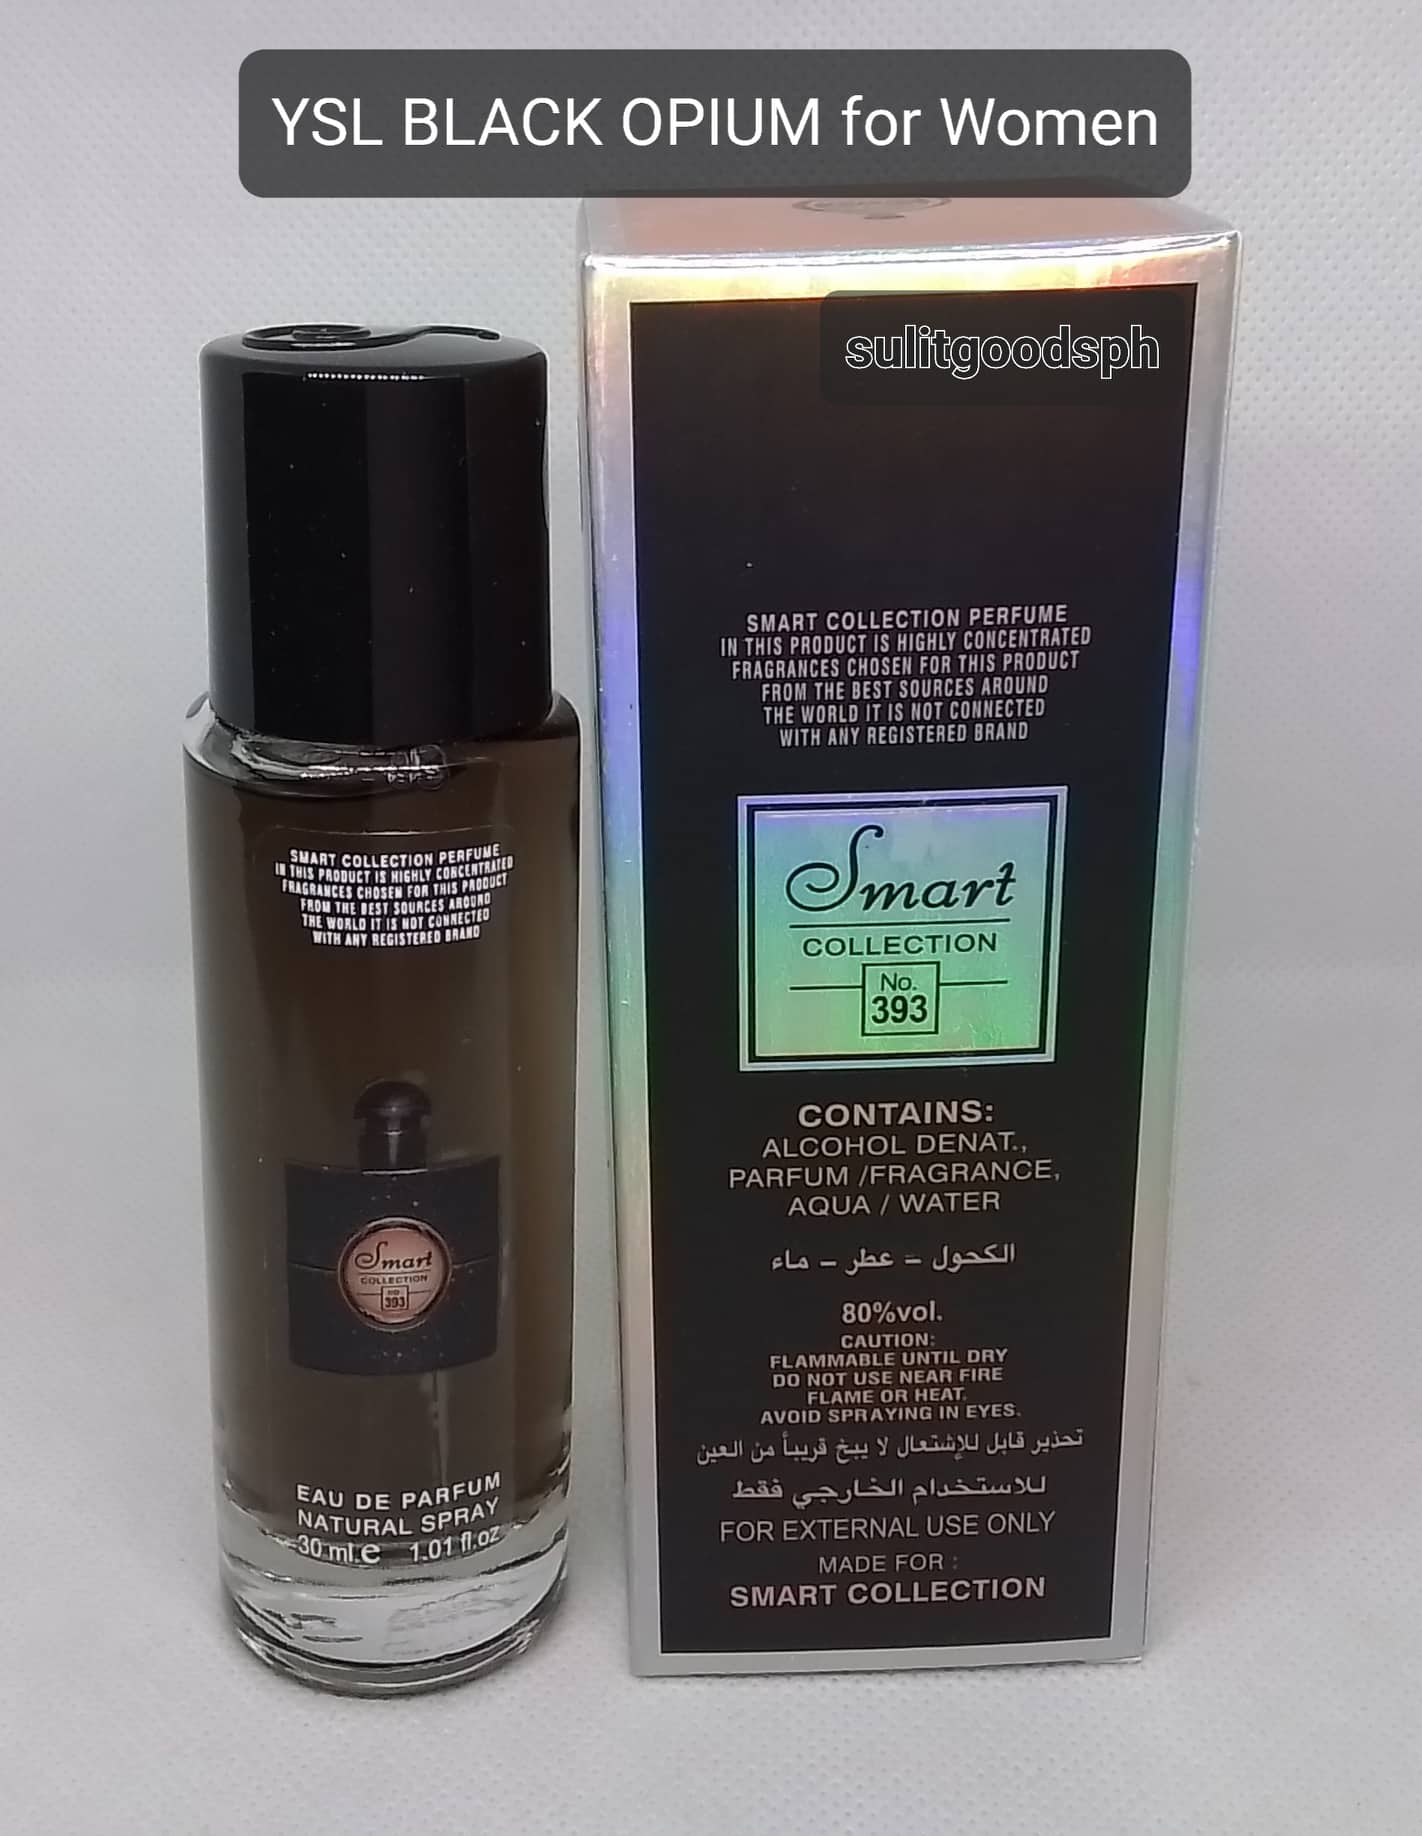 SMART COLLECTION PERFUME NO.317 FOR MEN 30 ML EDP